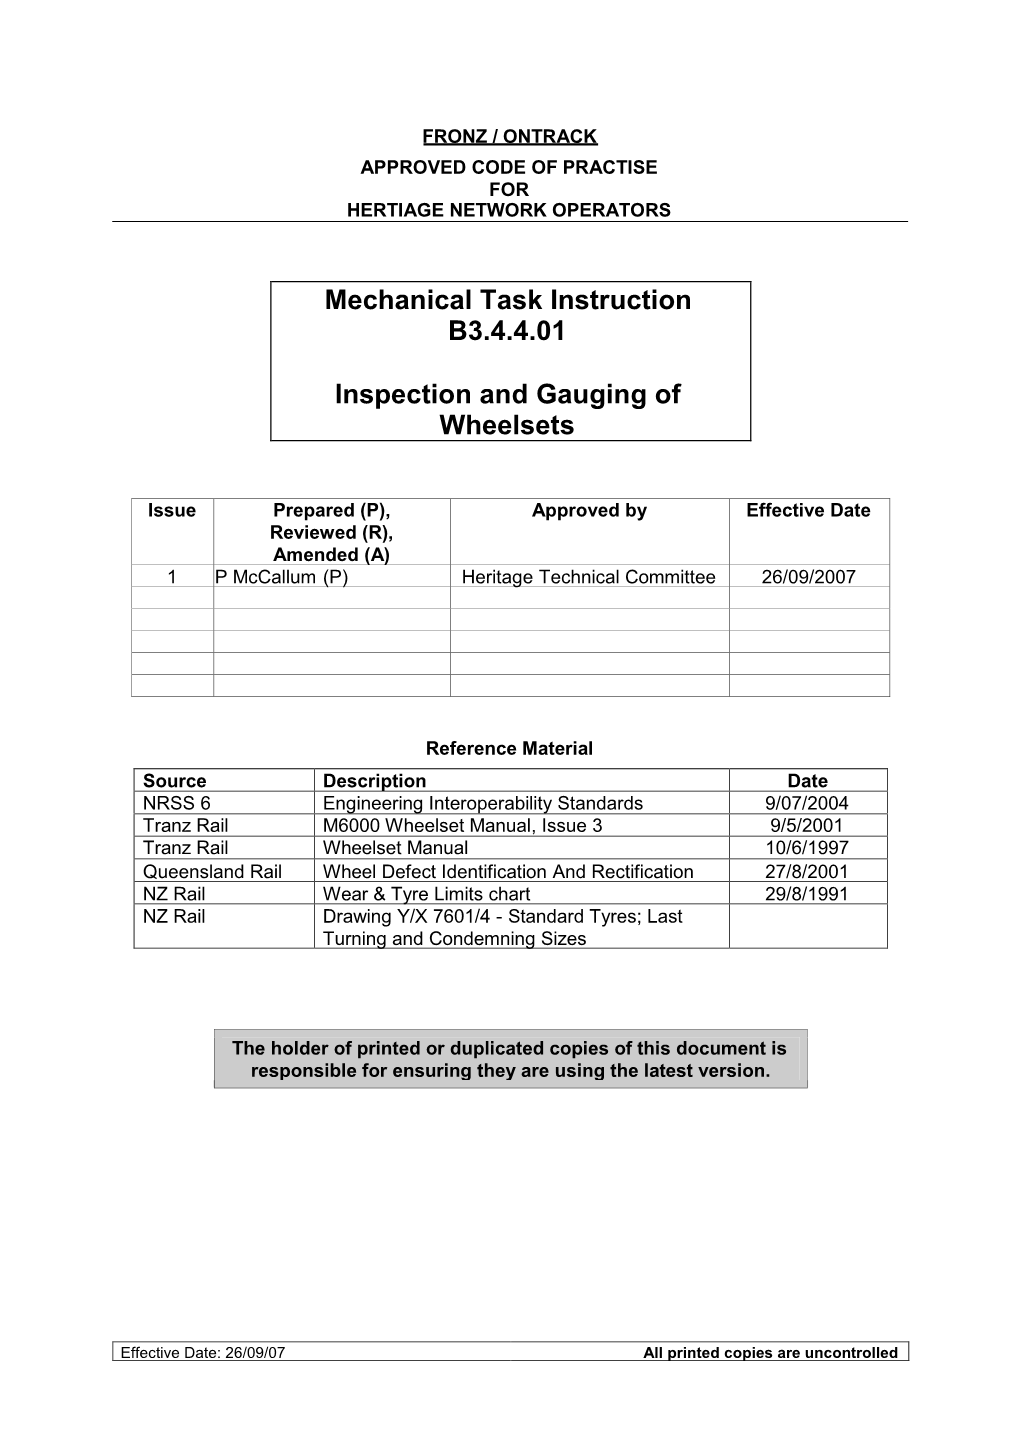 Mechanical Task Instruction B3.4.4.01 Inspection and Gauging of Wheelsets